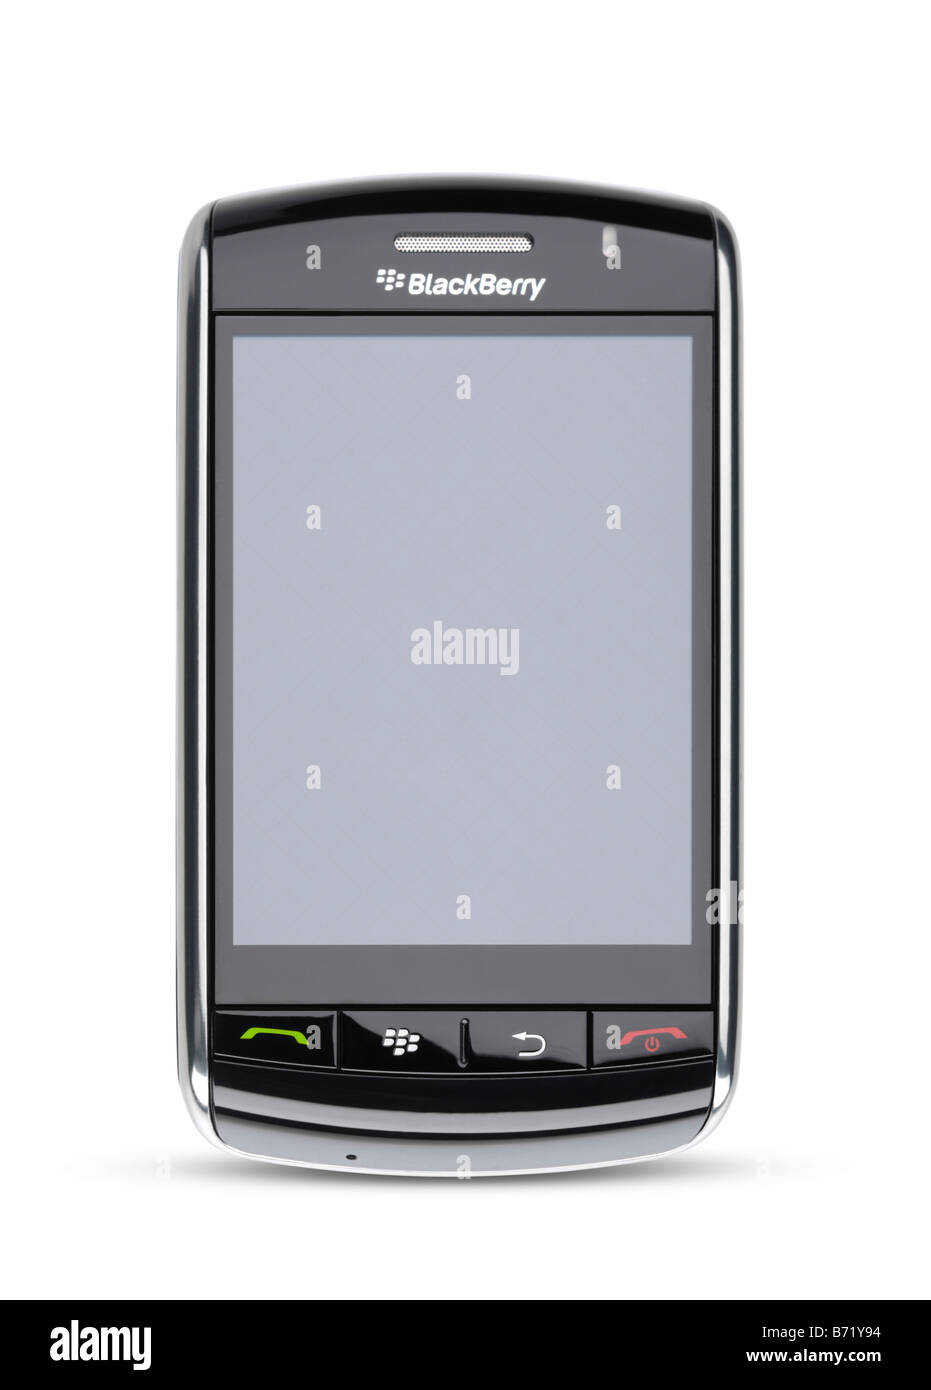 BlackBerry Storm touch screen smartphone Foto Stock